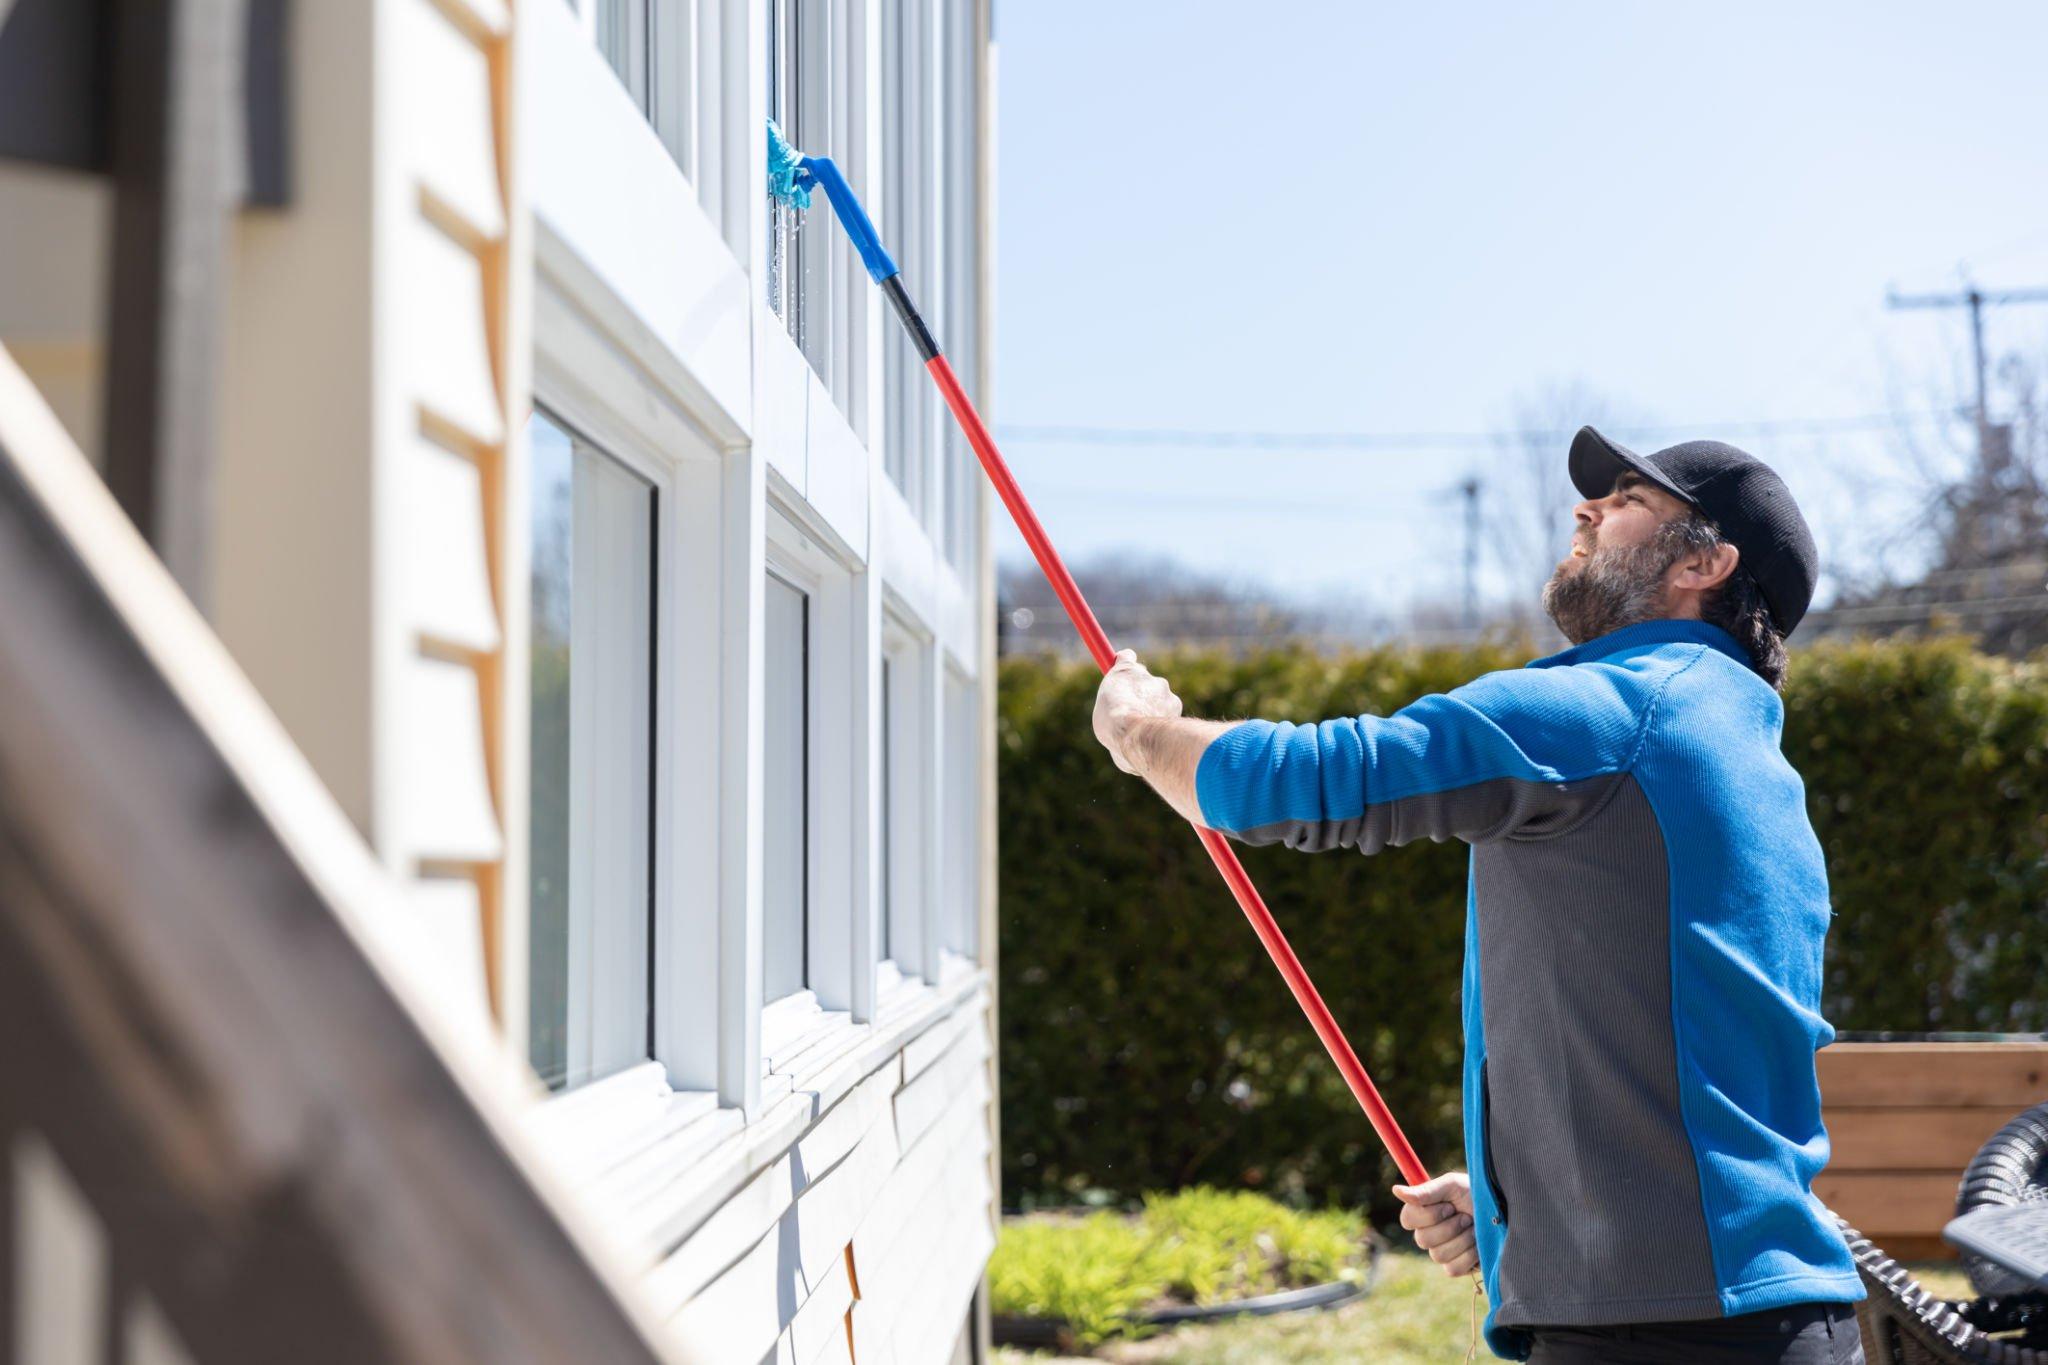 Looking for Window Cleaning Nearby? Signature Window Washing Delivers Sparkling Results